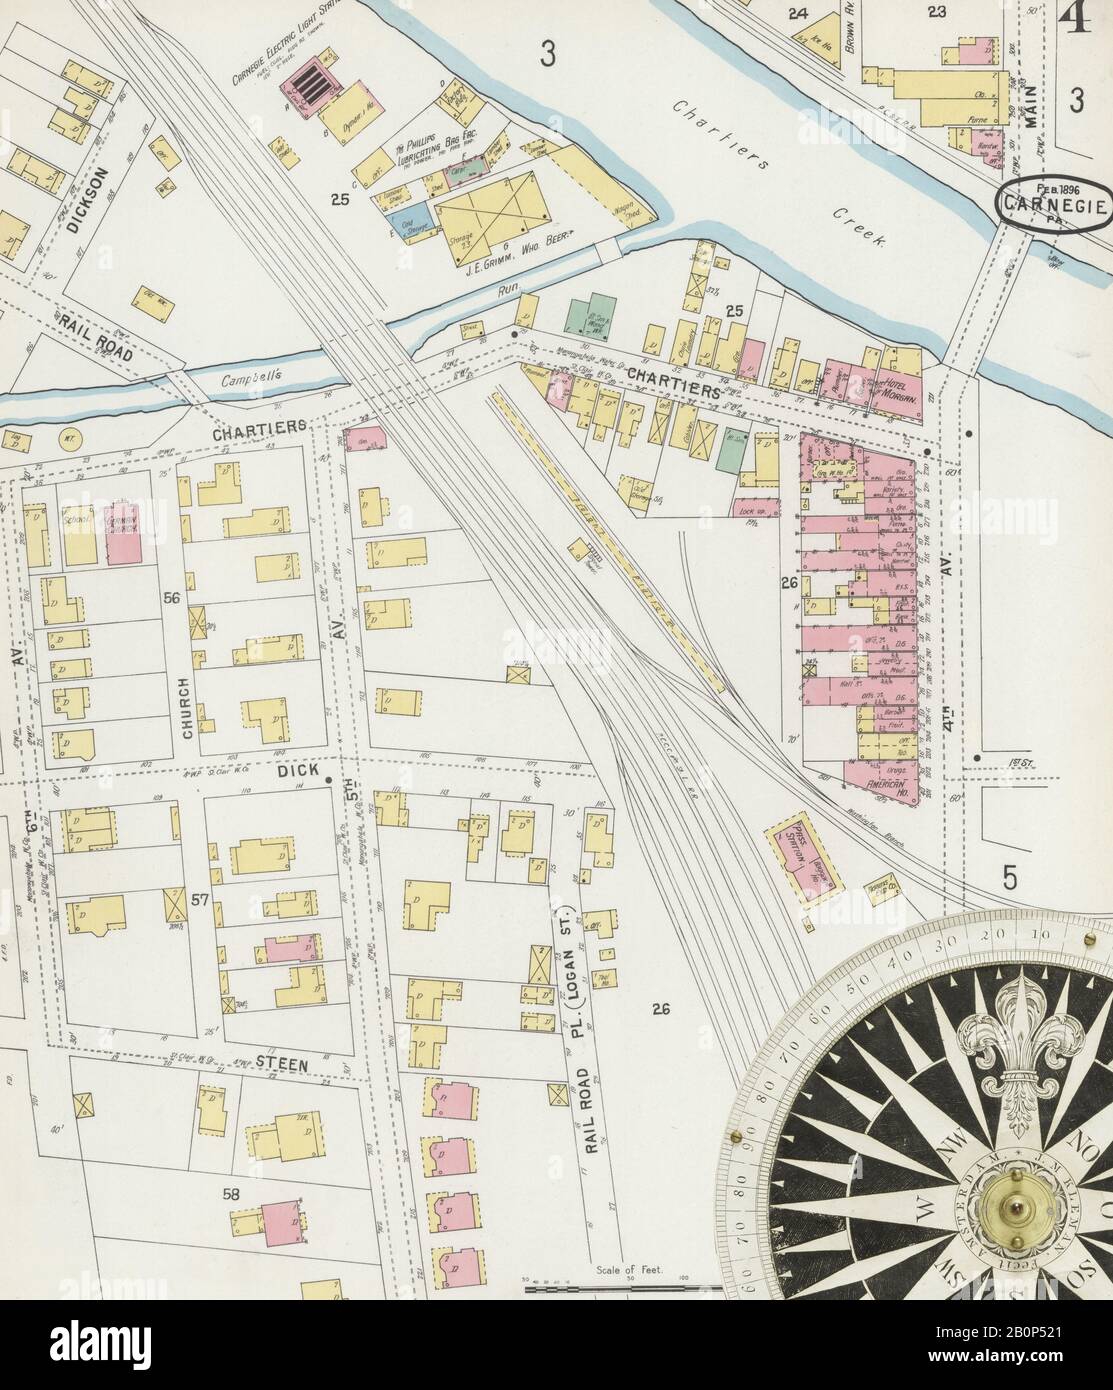 Image 4 of Sanborn Fire Insurance Map from Carnegie, Allegheny County, Pennsylvania. Feb 1896. 6 Sheet(s), America, street map with a Nineteenth Century compass Stock Photo